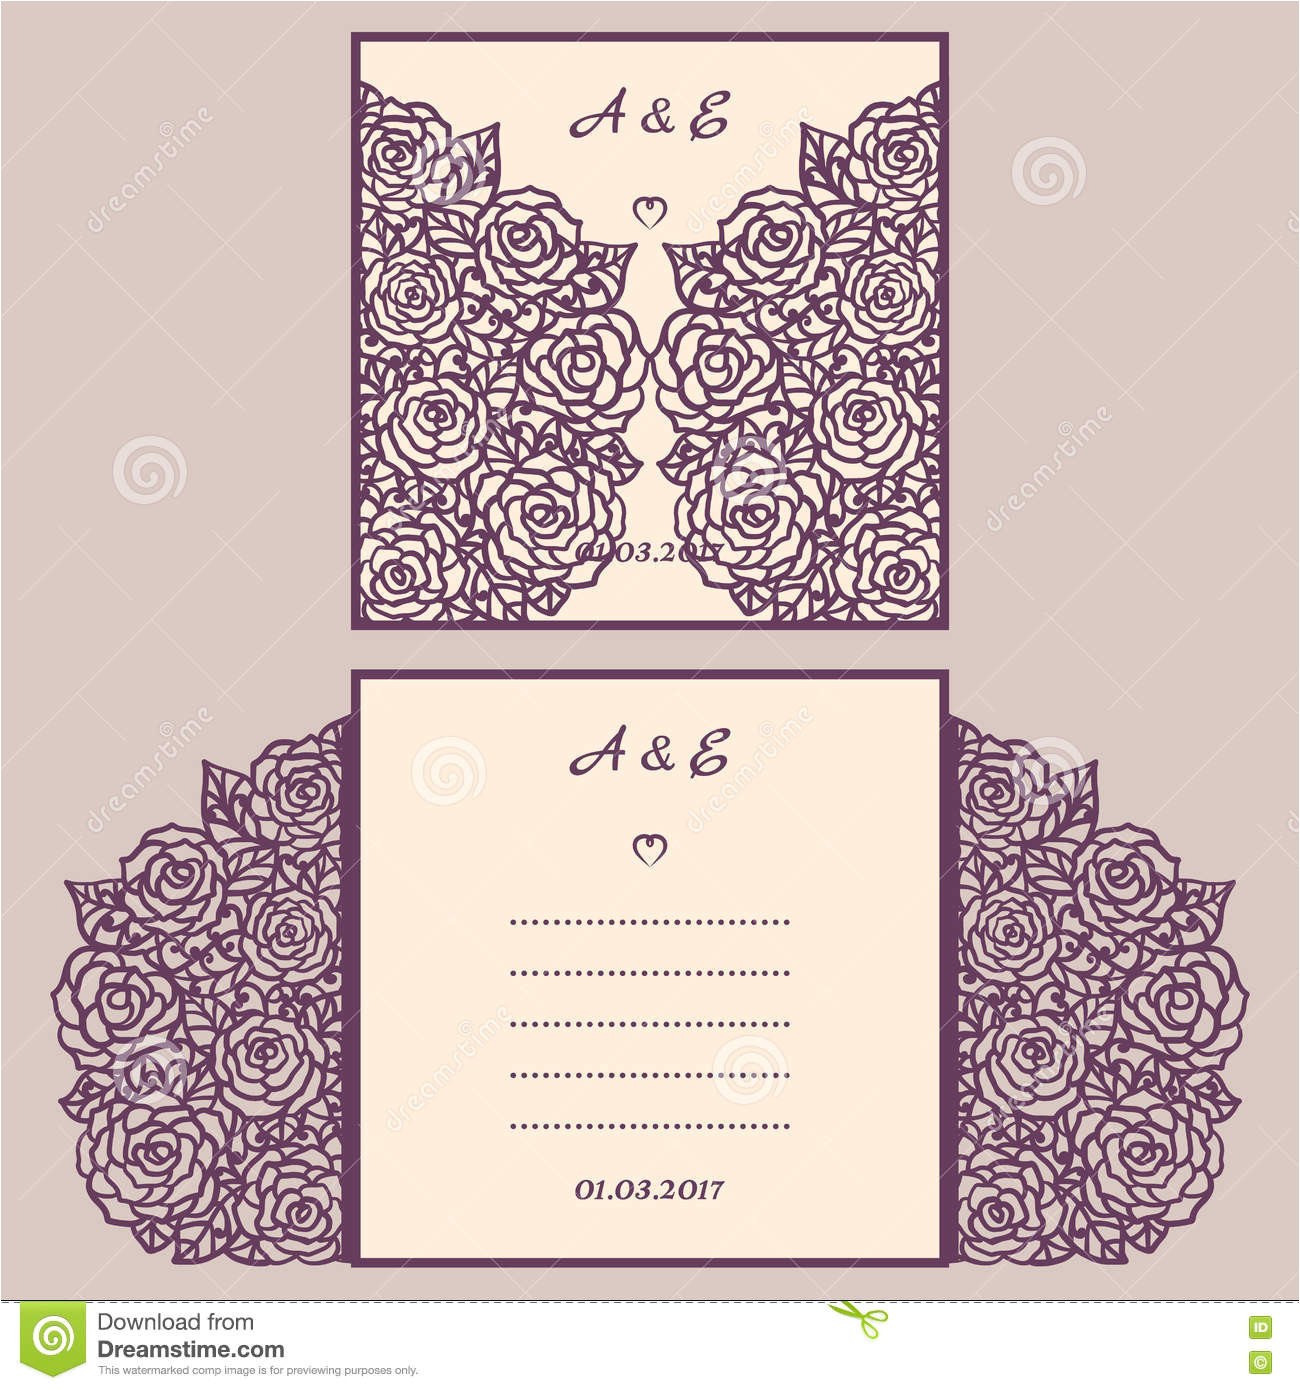 stock illustration wedding invitation greeting card abstract ornament vector envelope template laser cutting paper cut card image80888067